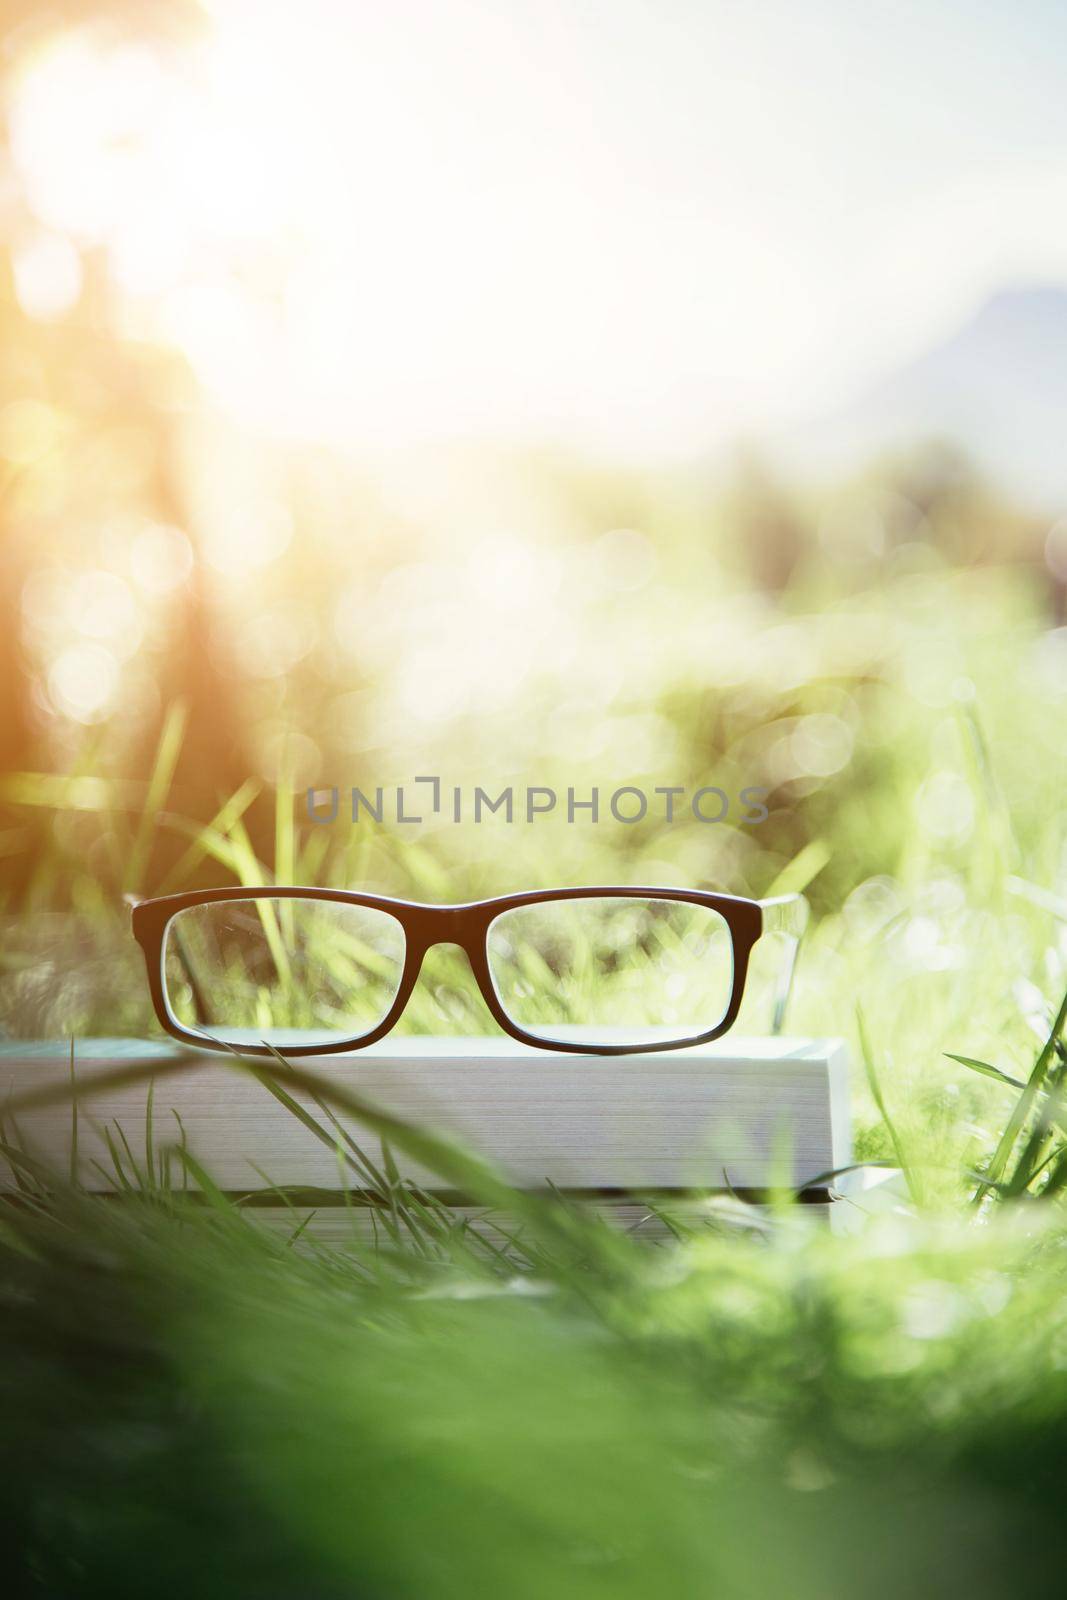 Black glasses and book outdoors in the park, summer time